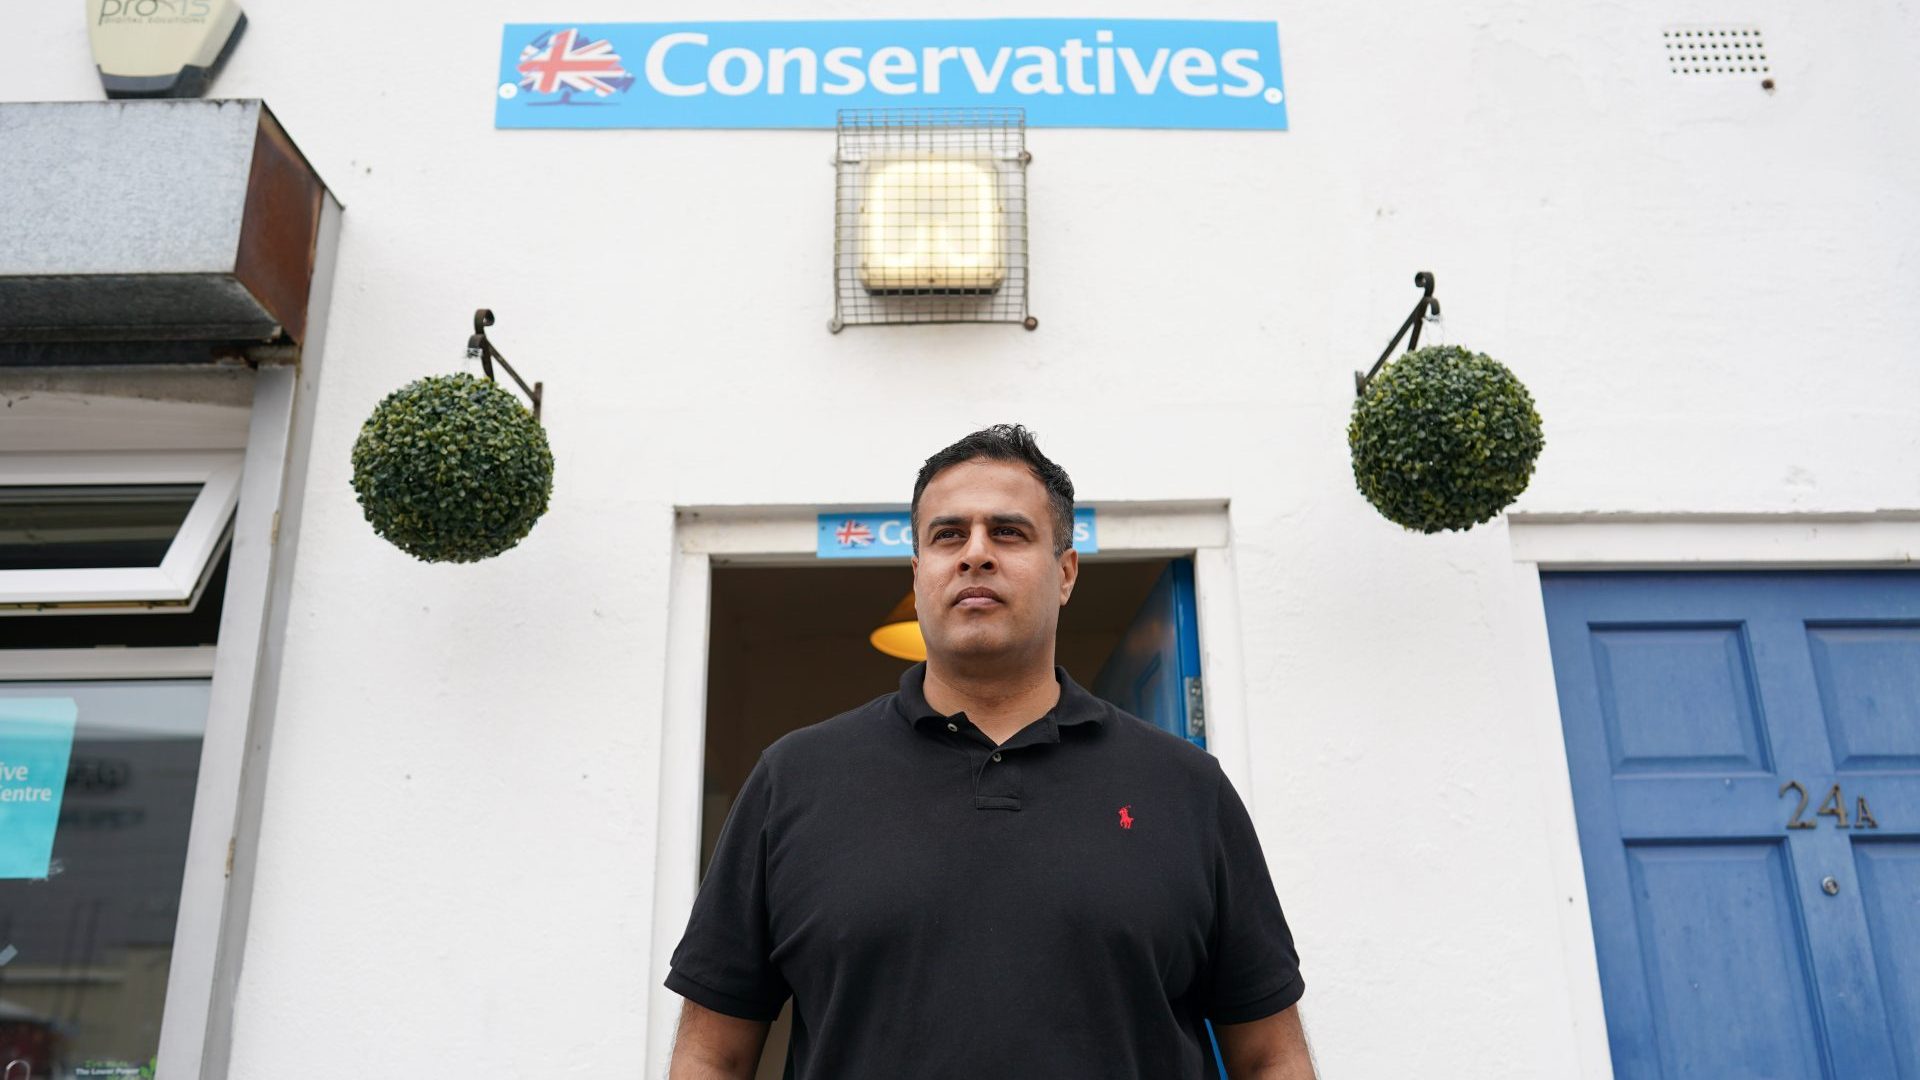 Conservative Party candidate, Nadeem Ahmed poses for pictures near the Conservative Party office in Wakefield ahead of the By-election on June 18 (Photo by Ian Forsyth/Getty Images)